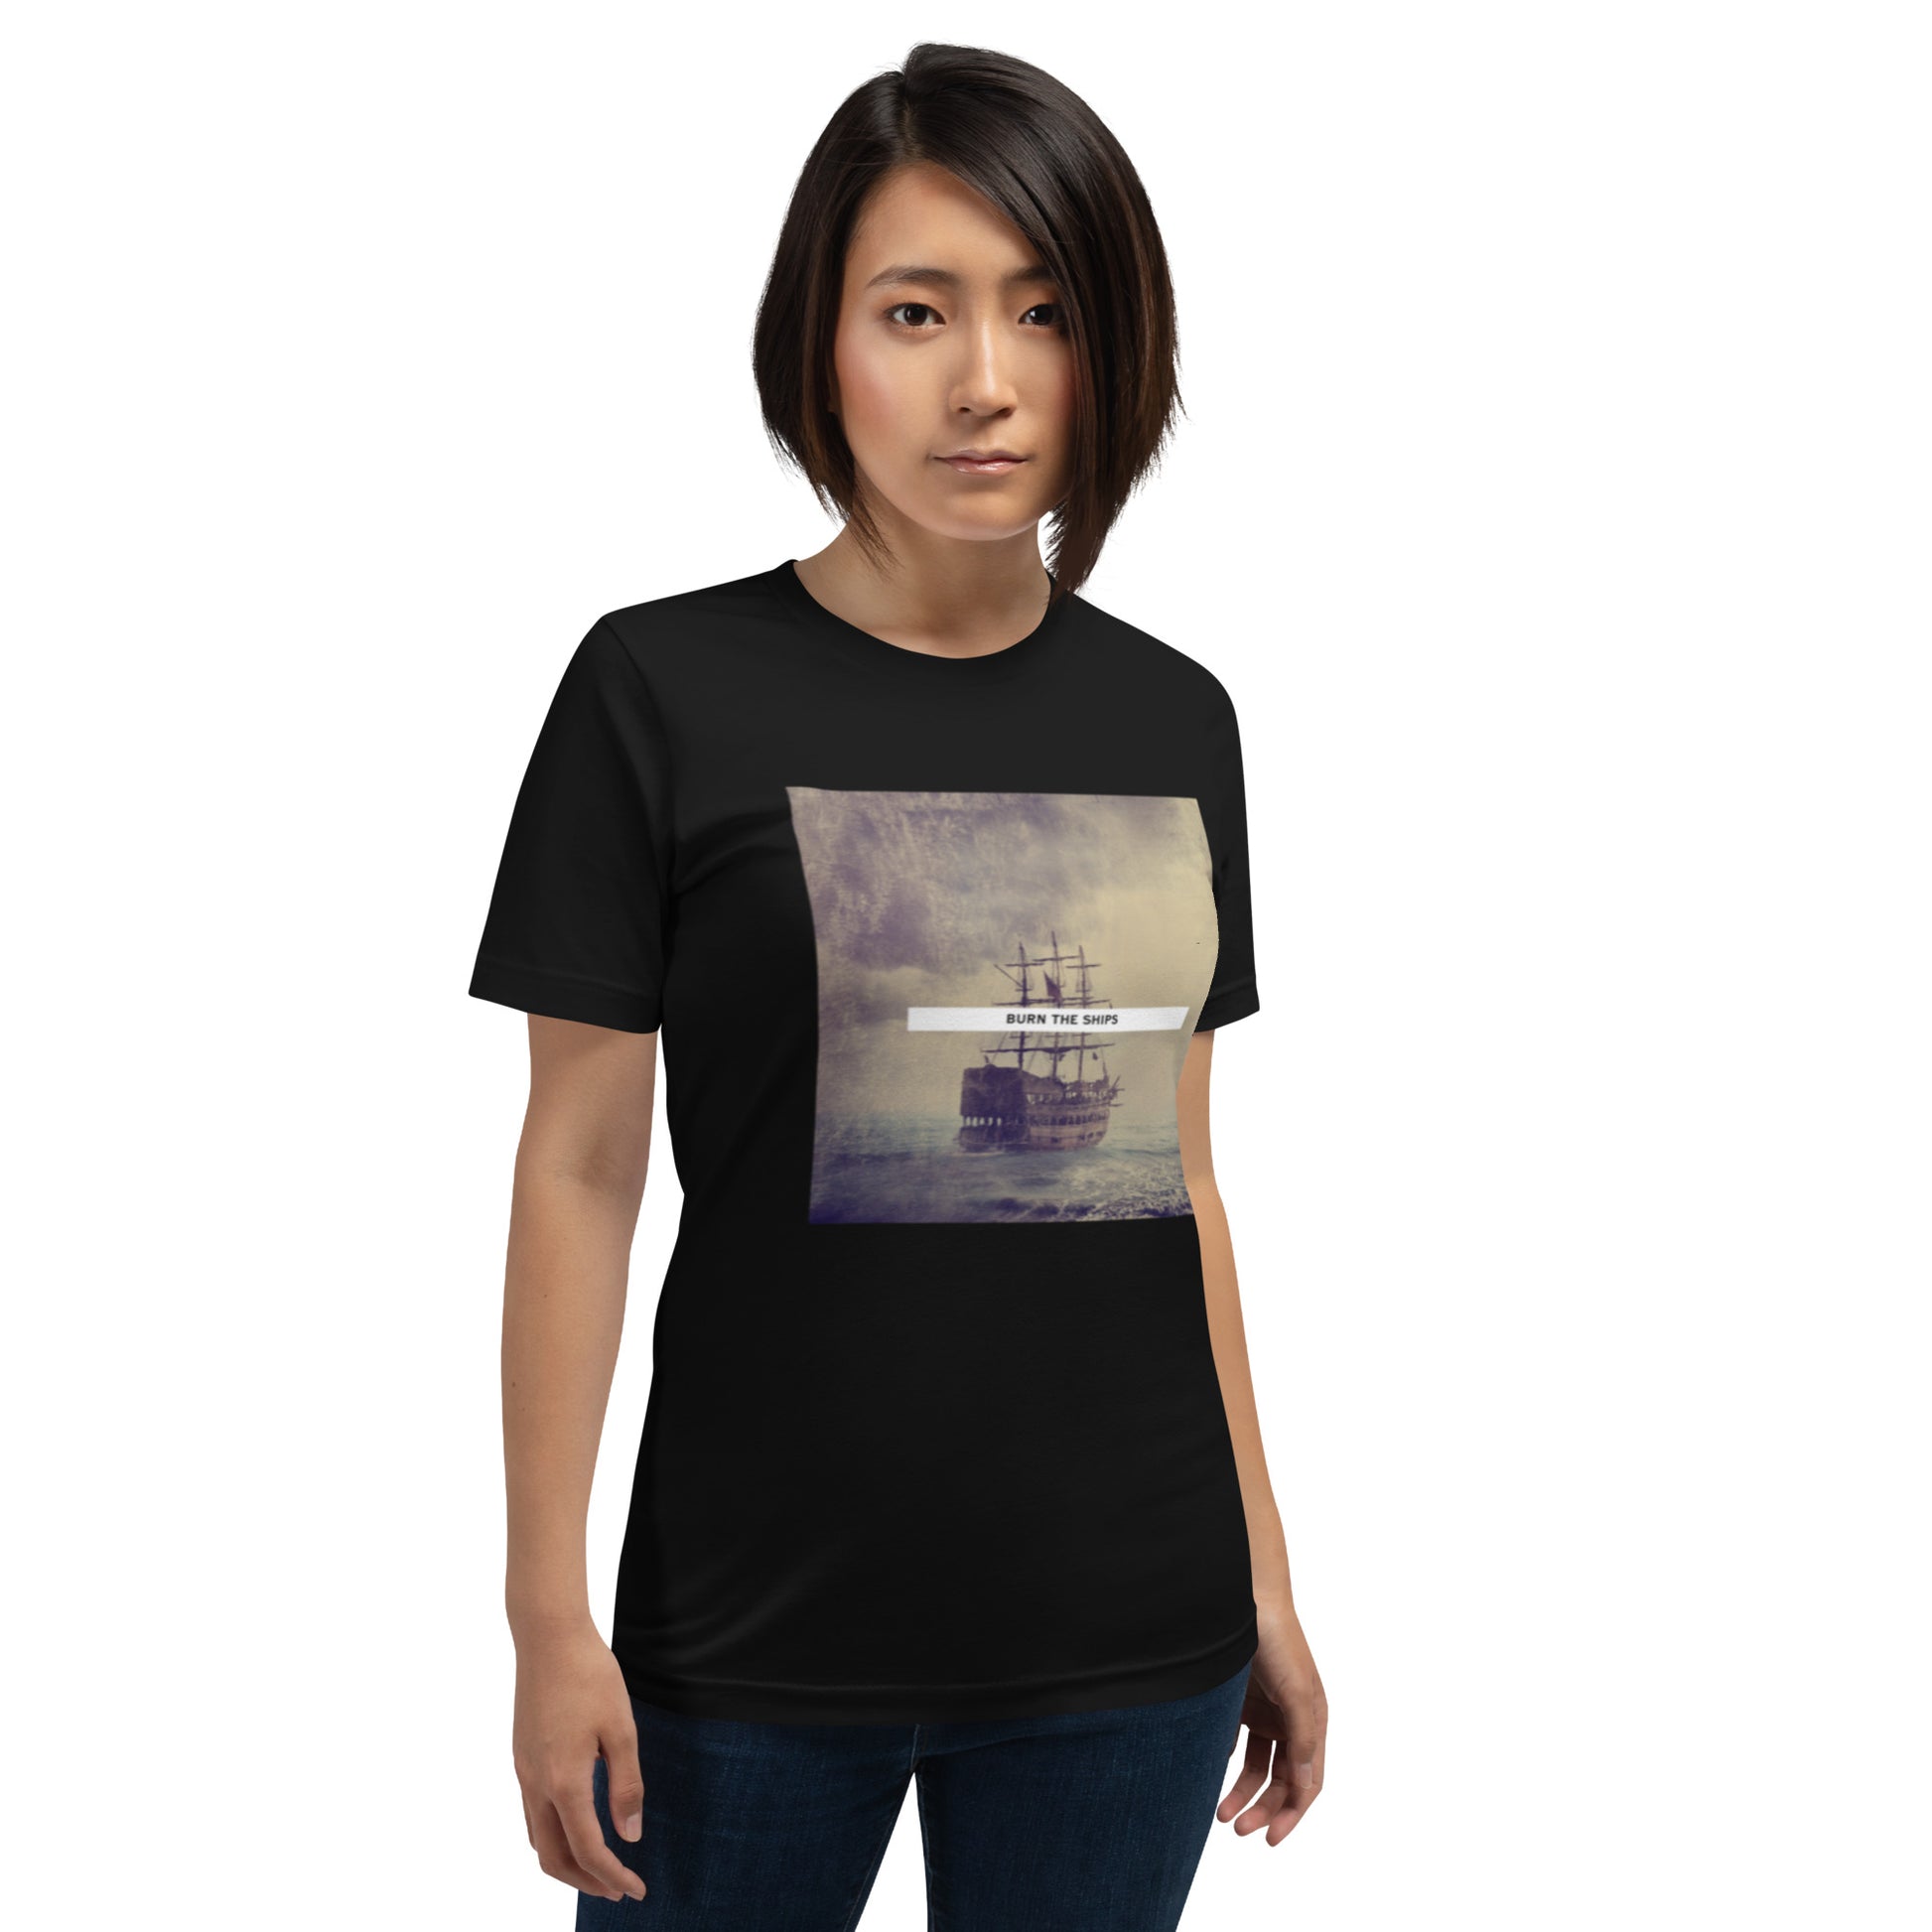 Burn the Ships shirt featuring a vintage image of a sailboat, black for men and women. 